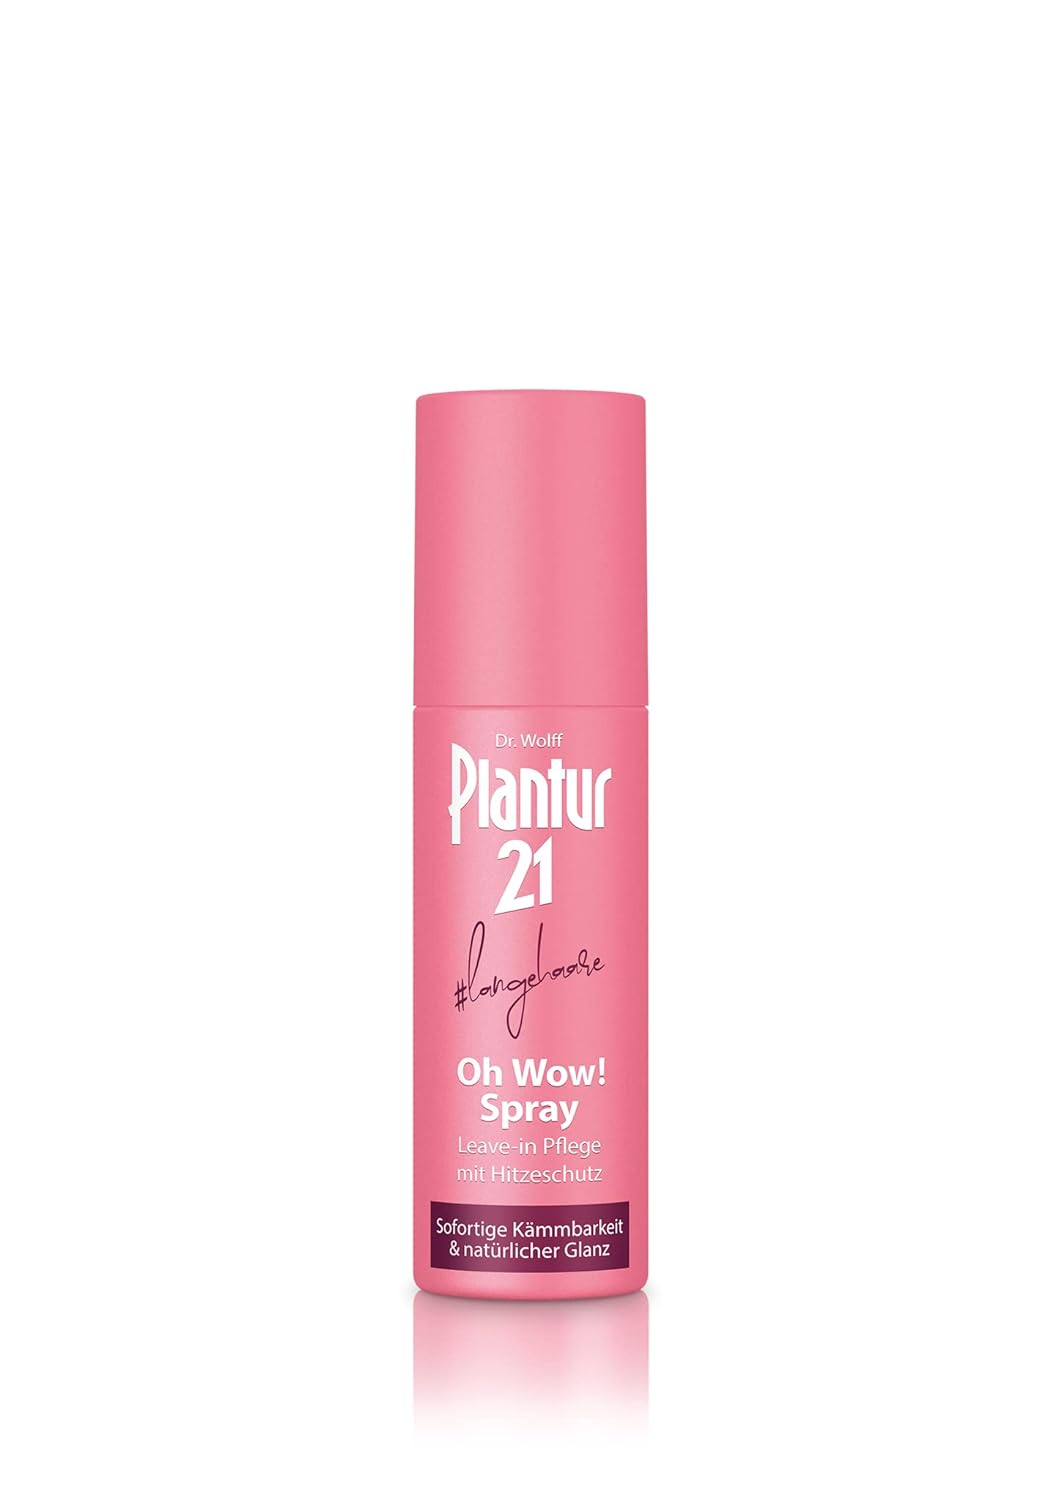 Plantur 21#langehaare Oh Wow! Spray - 1 x 100 ml - Leave-in Care with Heat Protection | Instant Combability | Natural Shine